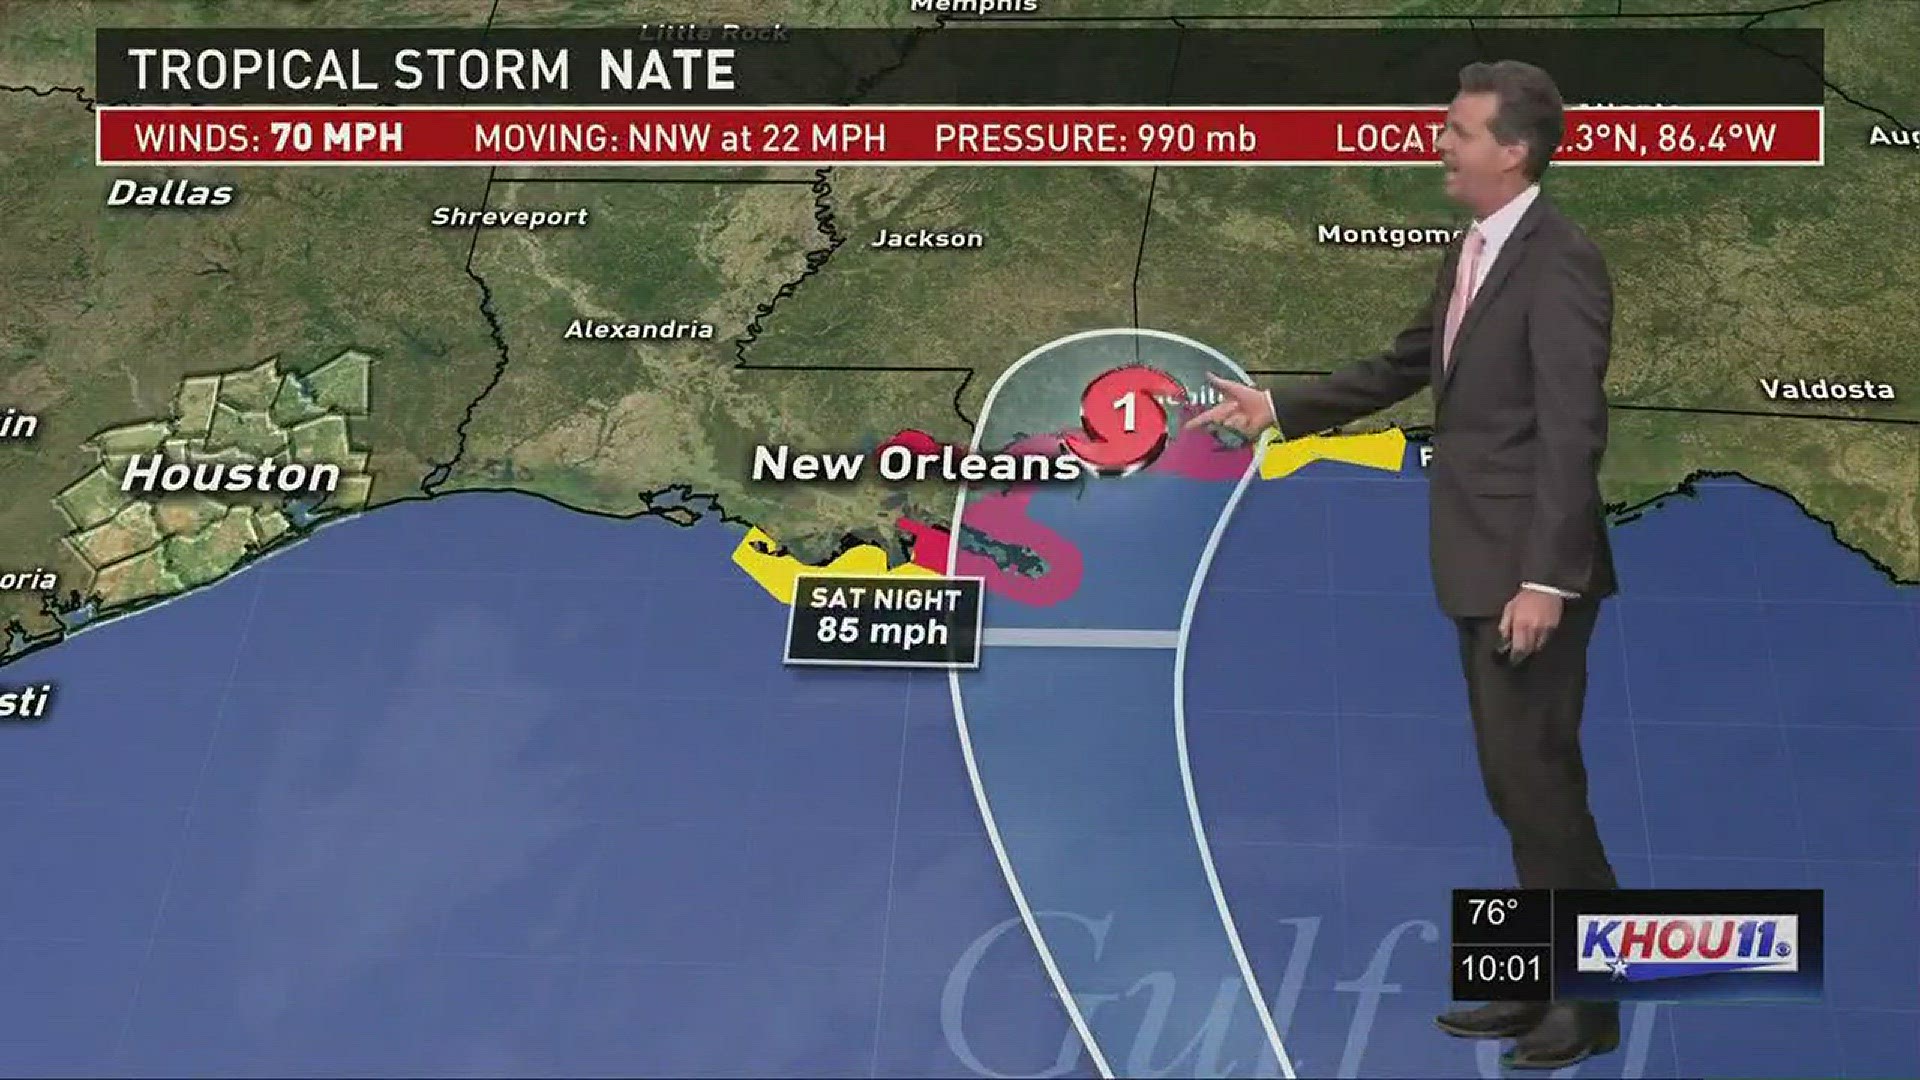 Tropical Storm Nate is forecast to make landfall near New Orleans Saturday night.